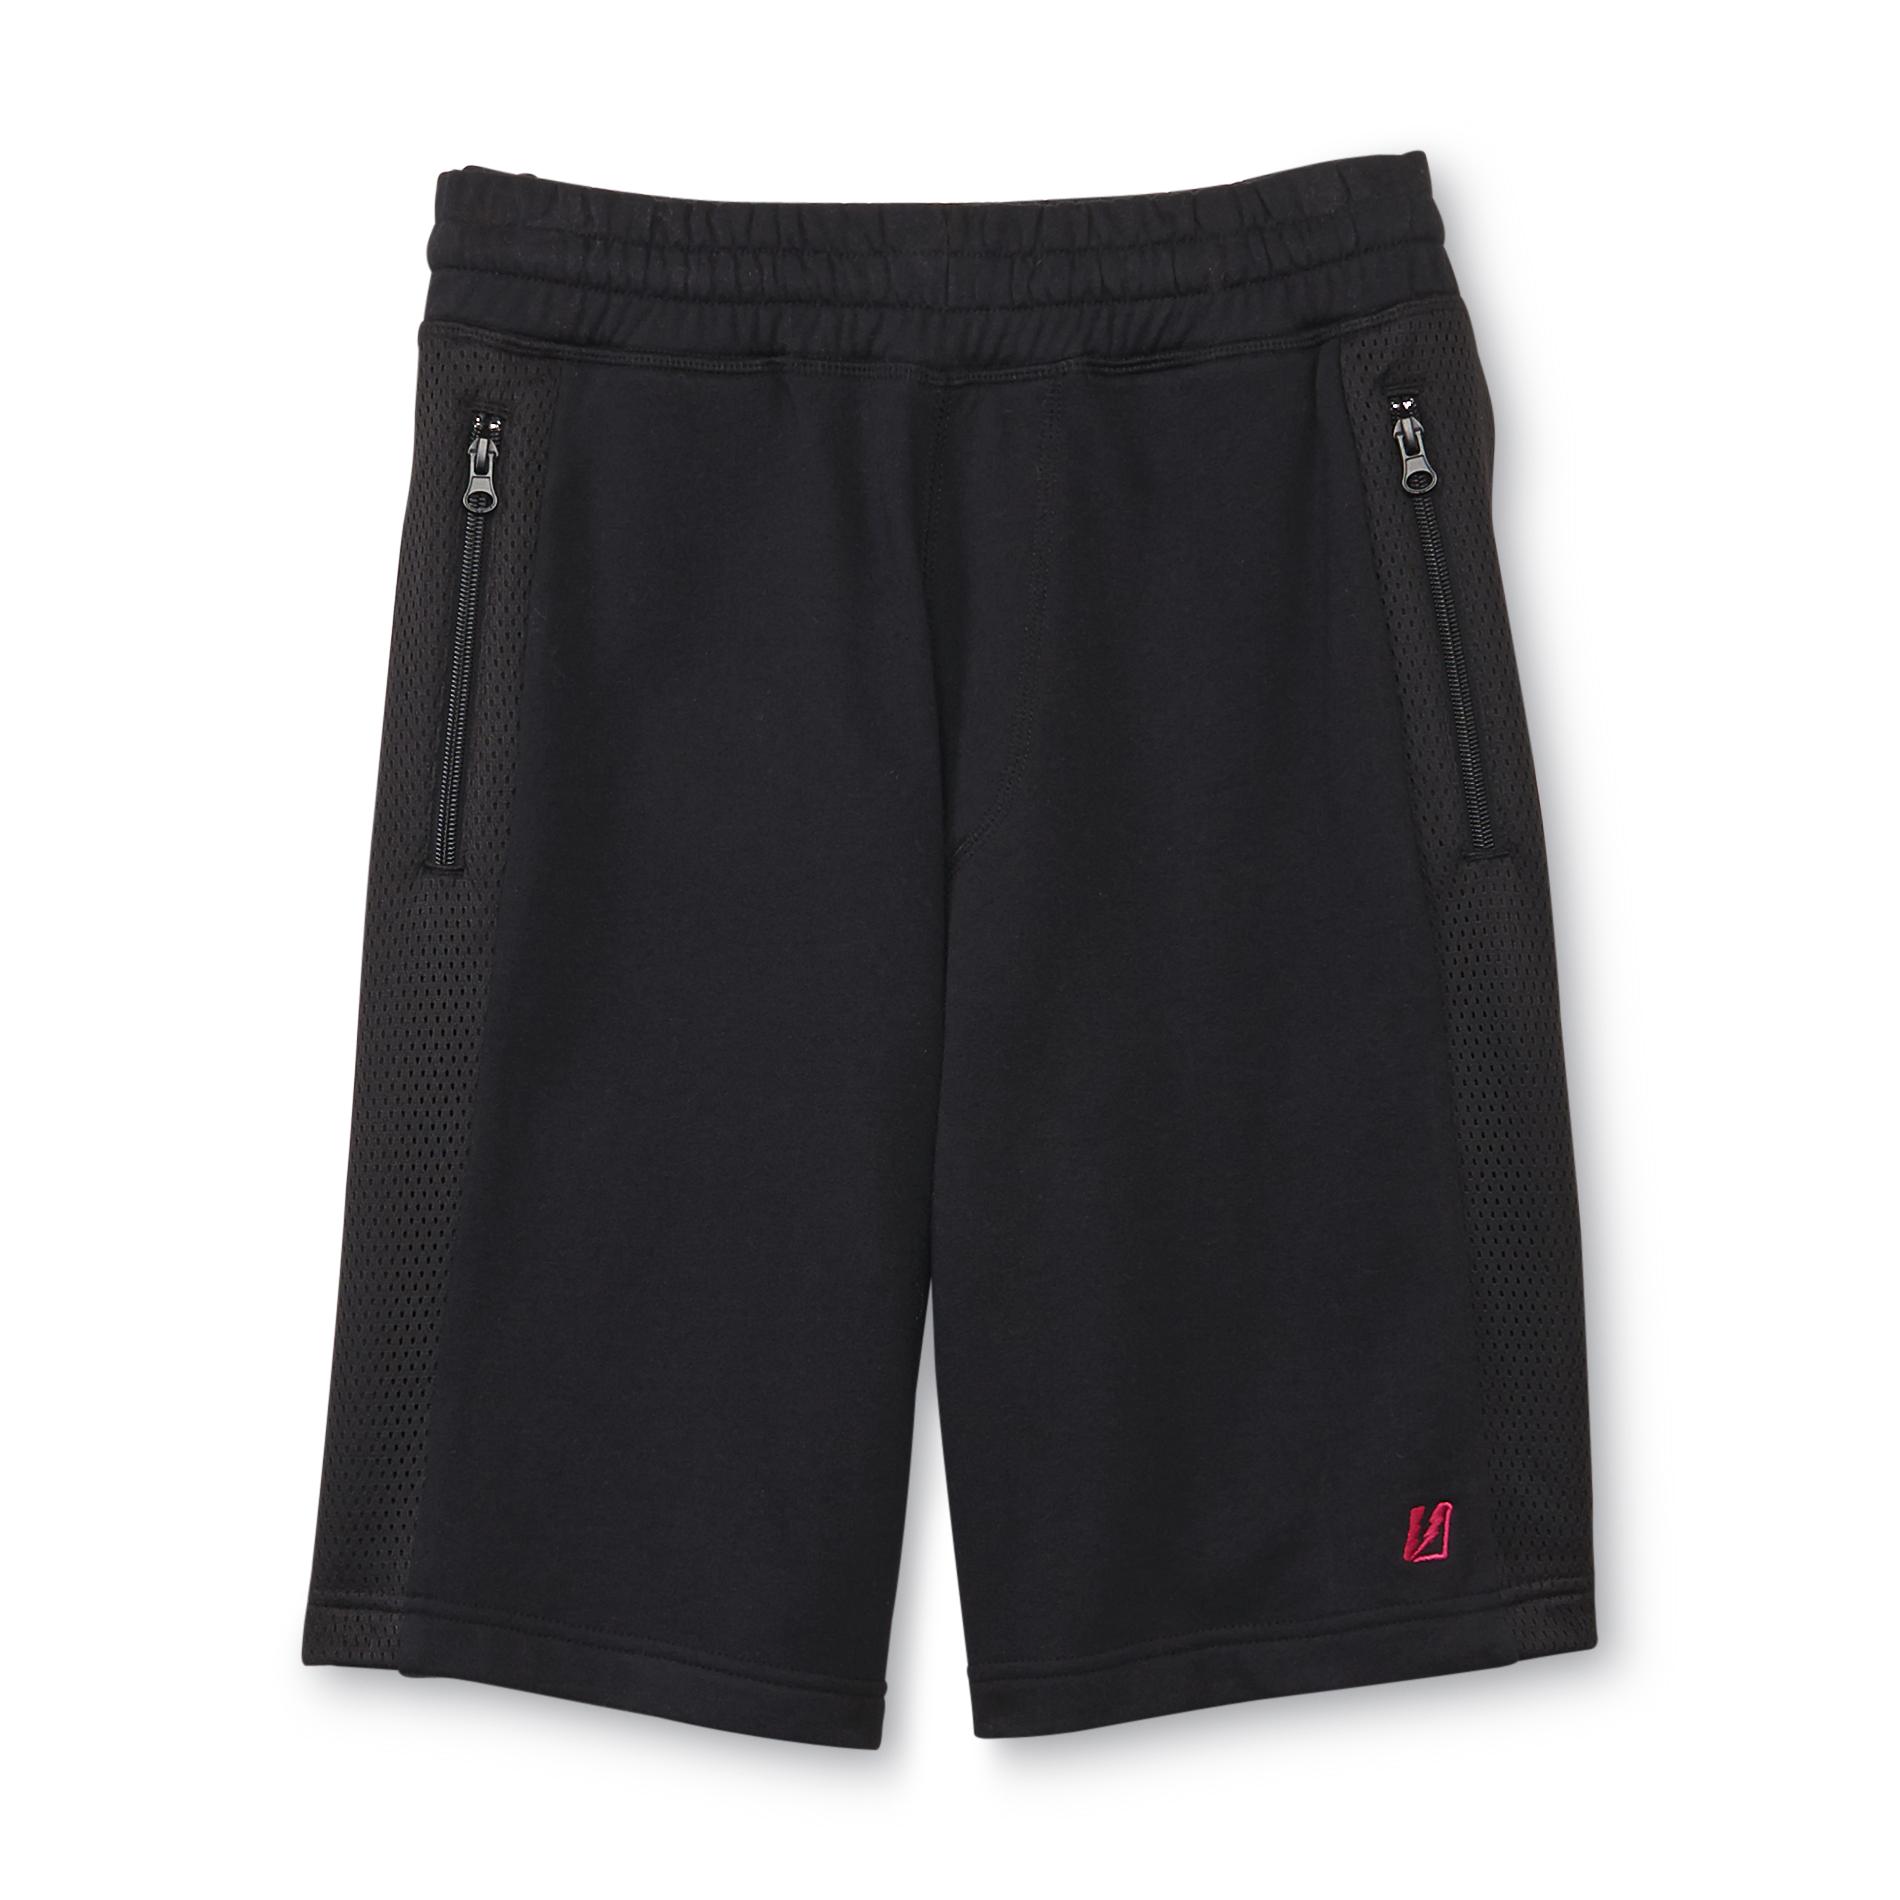 Amplify Young Men's Knit Athletic Shorts